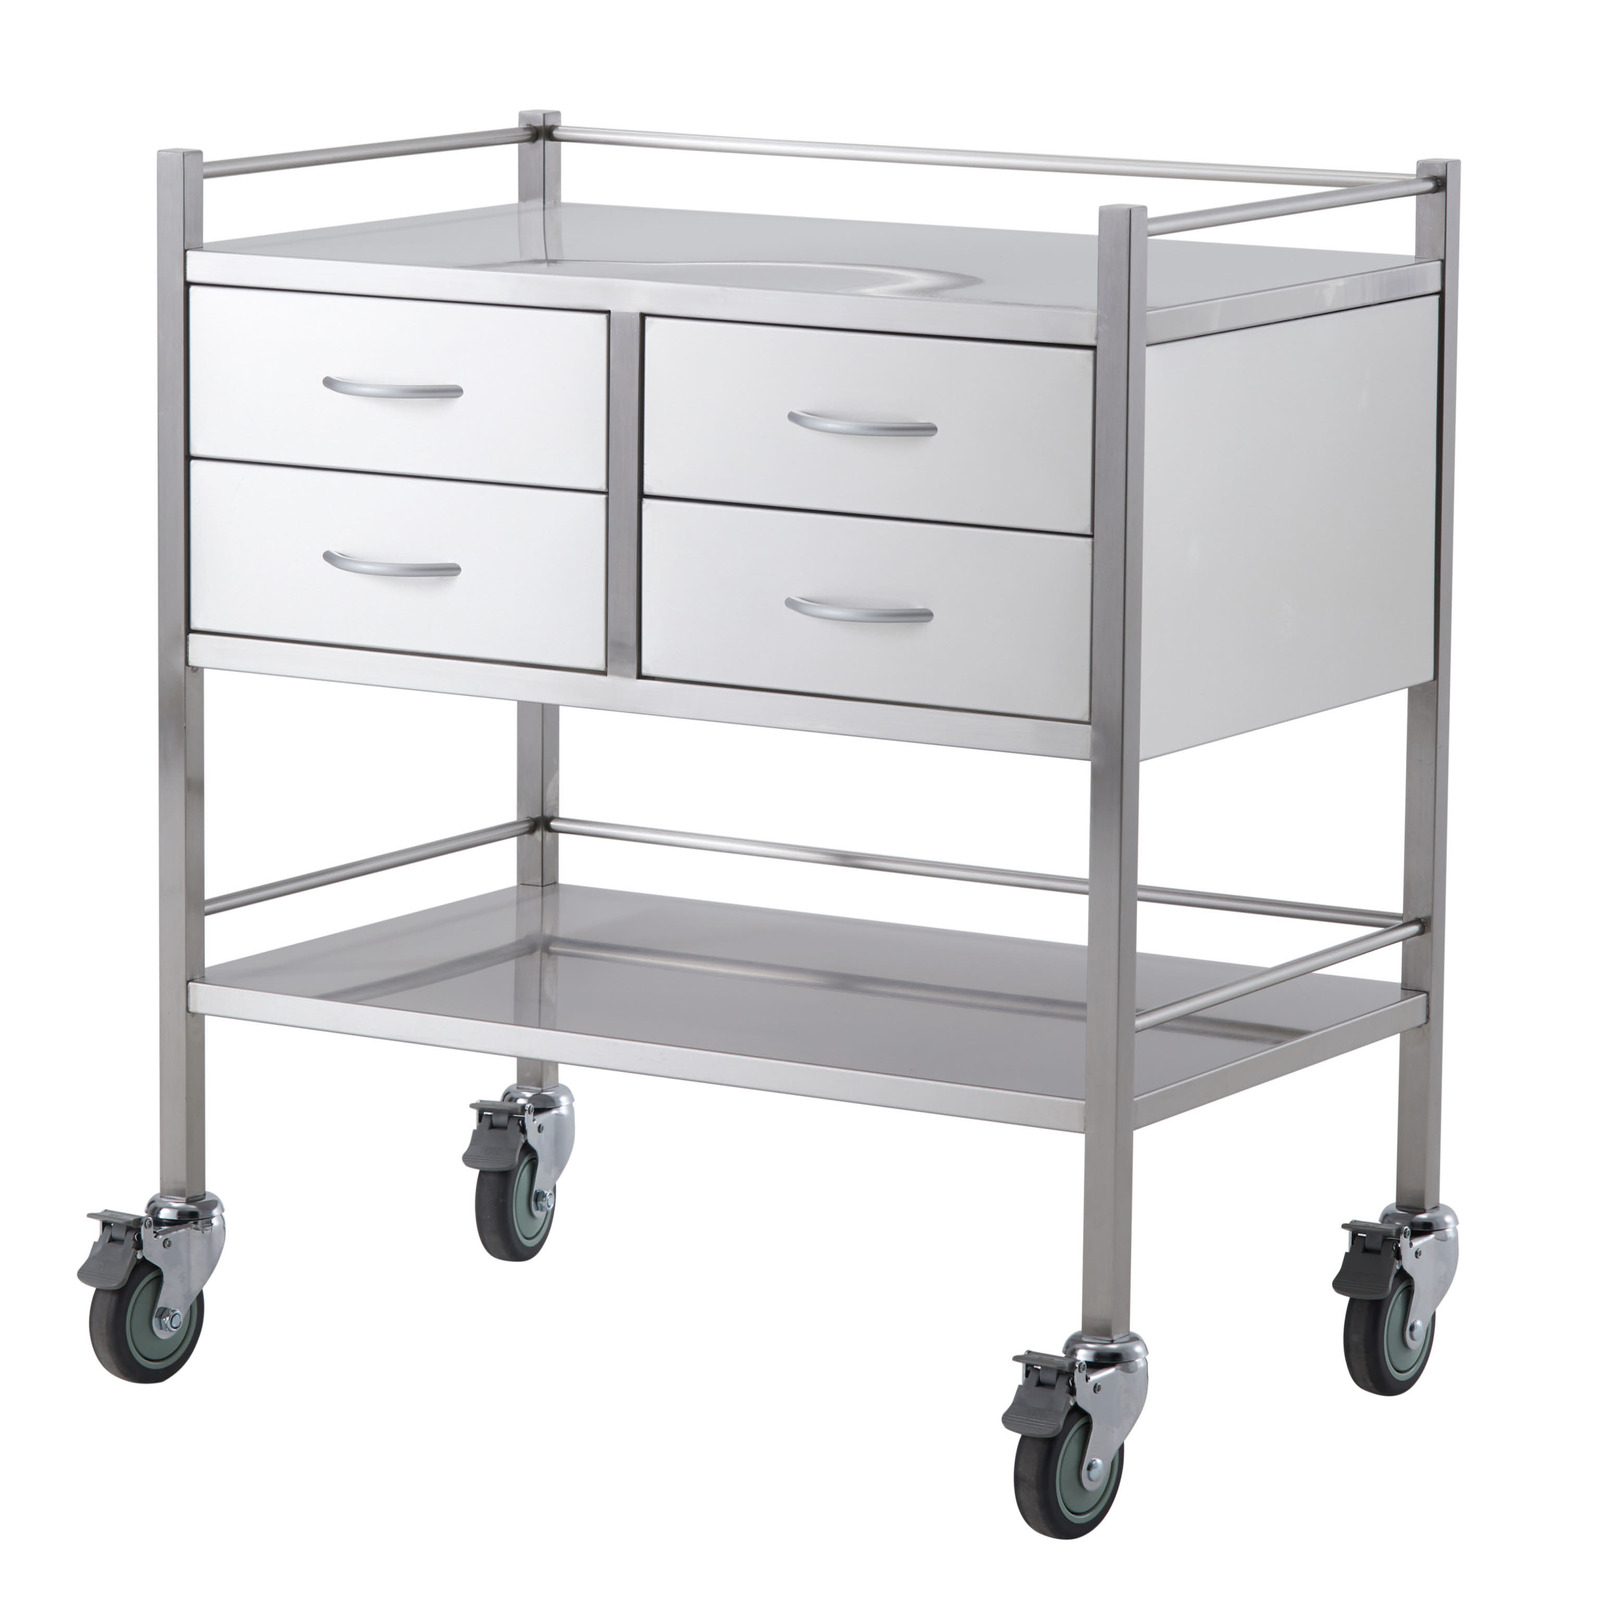 Double Stainless Steel Instrument Trolley (with 4 Drawers 2 over 2)